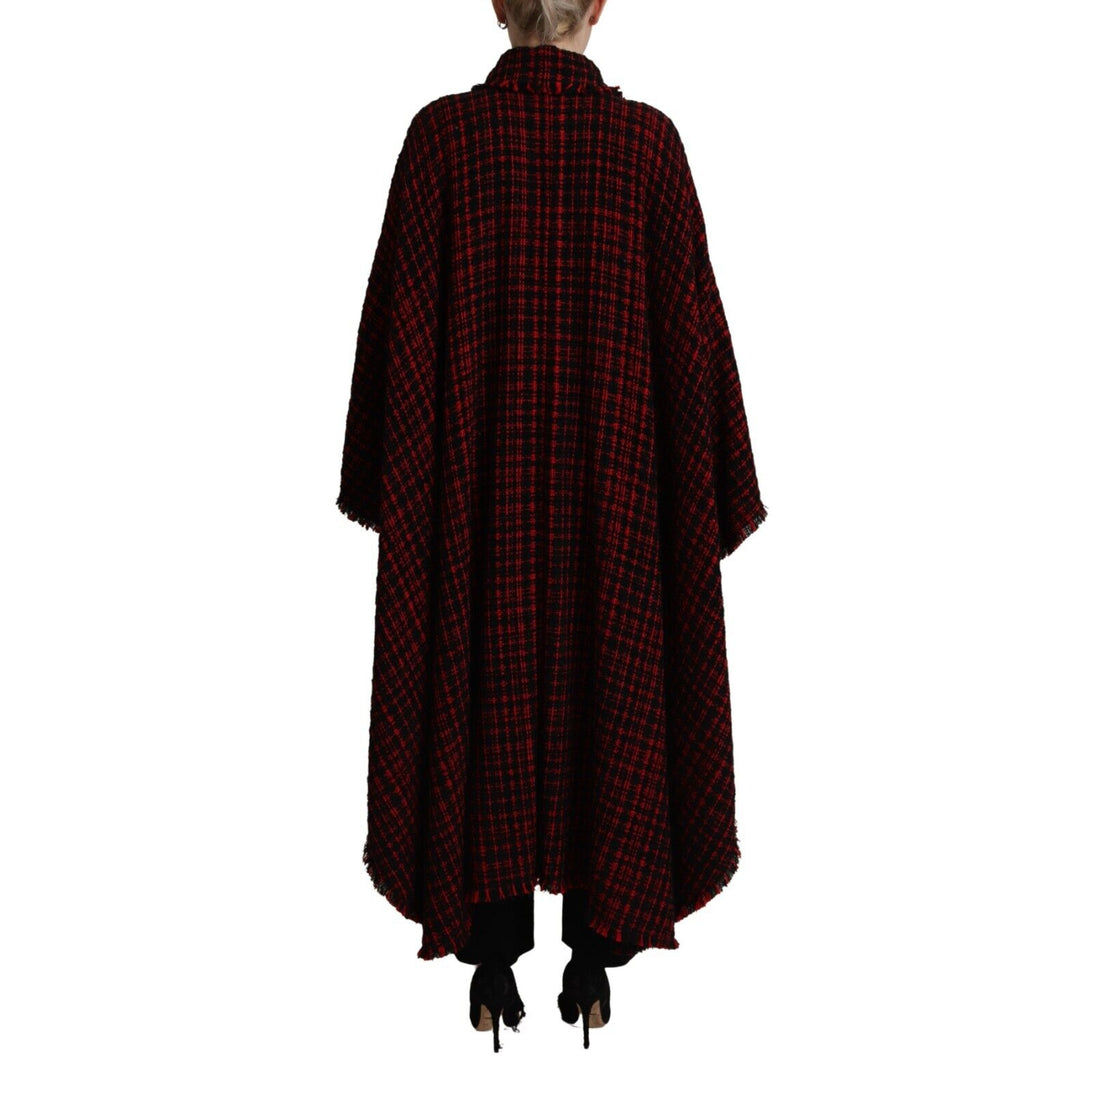 Dolce & Gabbana Black Red Cotton Checkered Over Coat Jacket